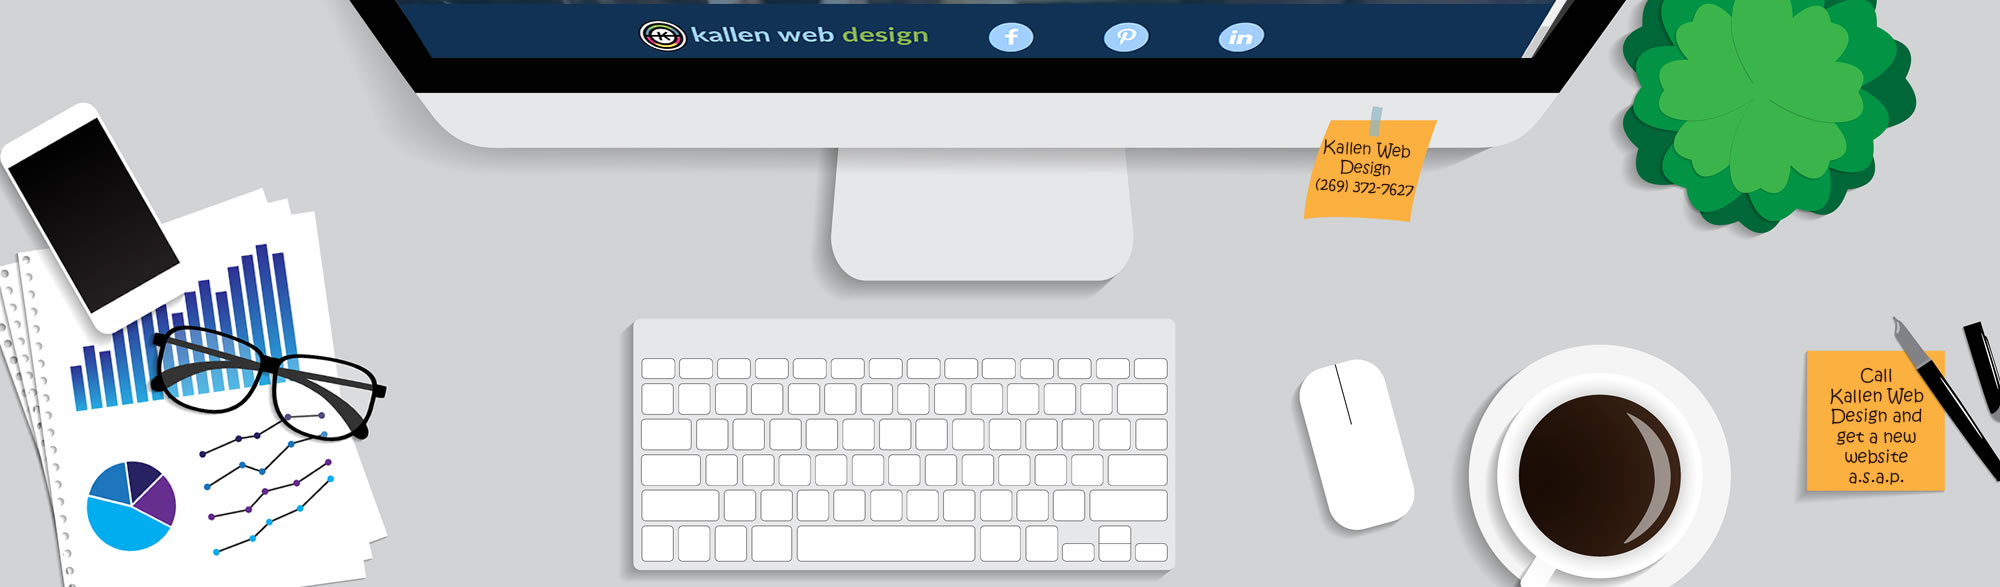 Image showing desktop items highlighting the need to call Kallen Web Design for the best web development in Kalamazoo.